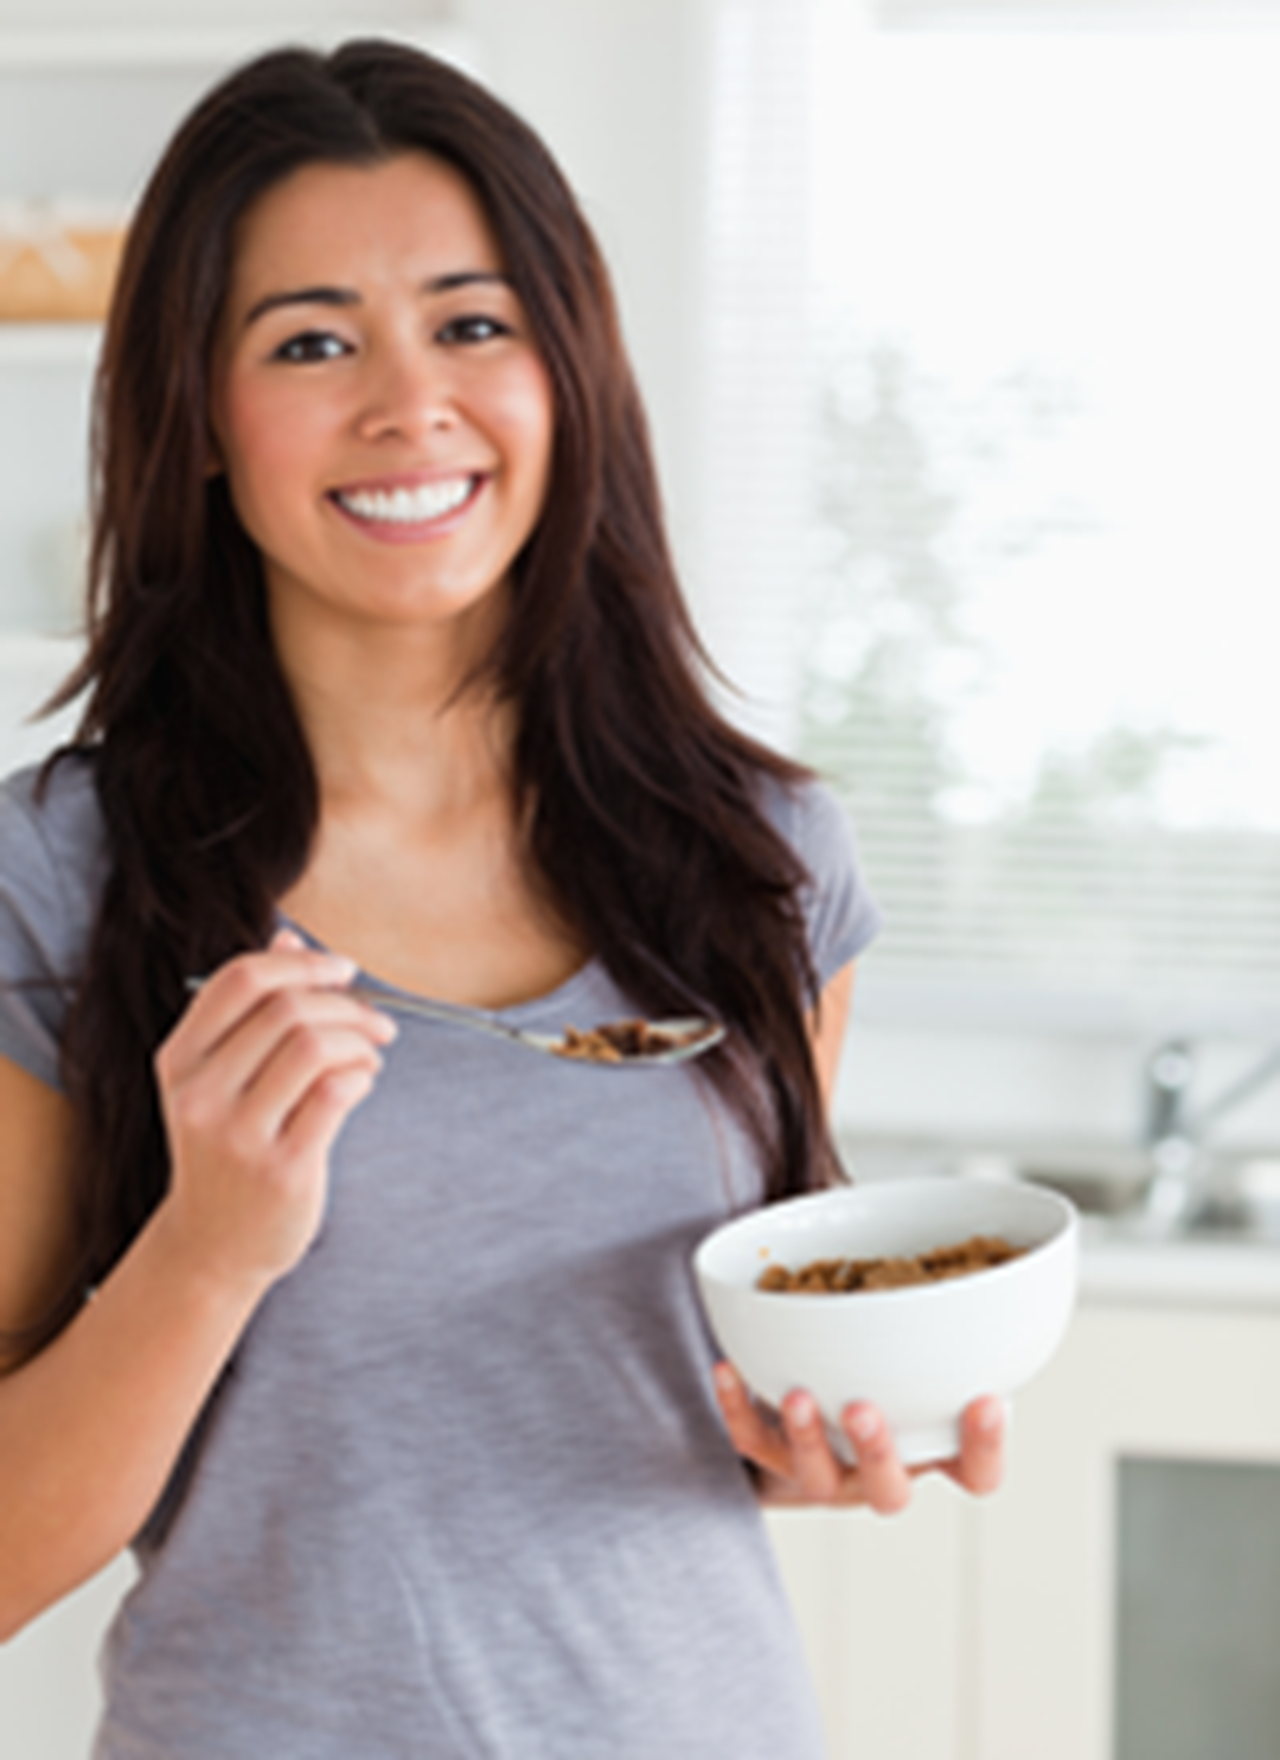 Image of young woman eating cereal